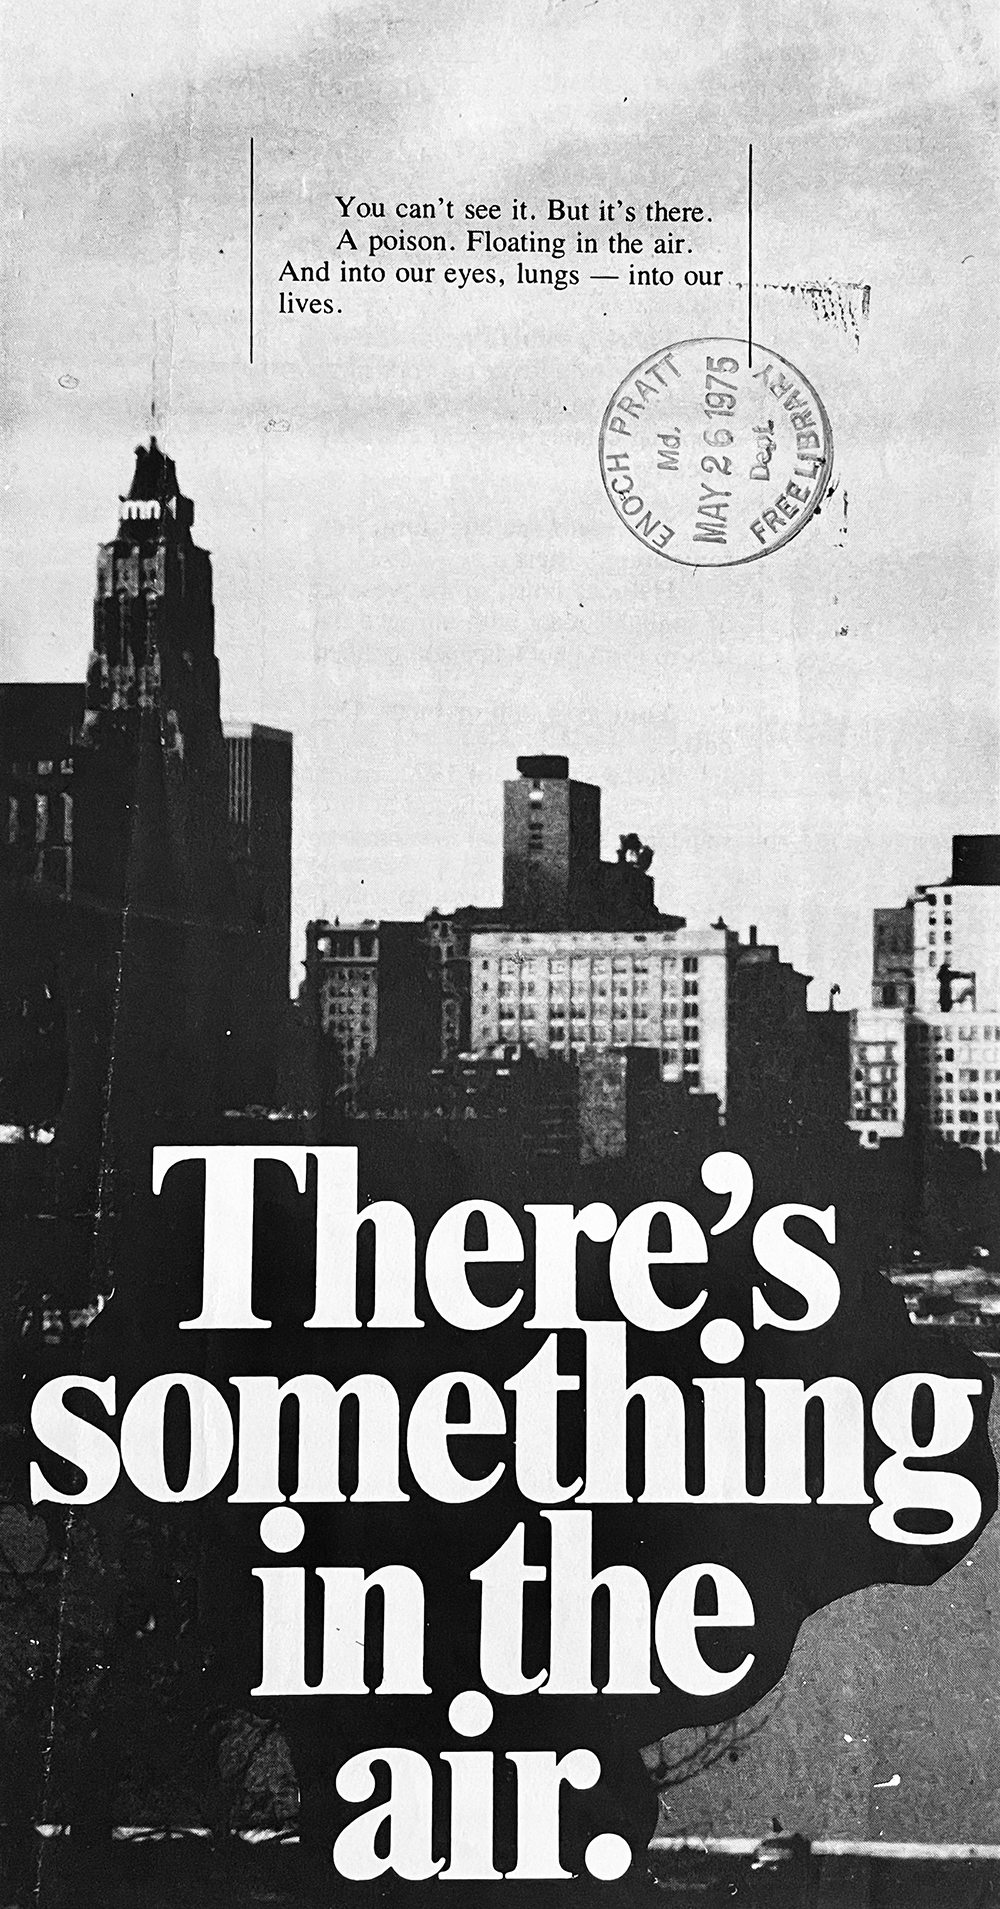 “There’s something in the air.” Pamphlet published by Baltimore’s Better Air Coalition in 1976. Enoch Pratt Free Library, Maryland Department, VF, Air Pollution.